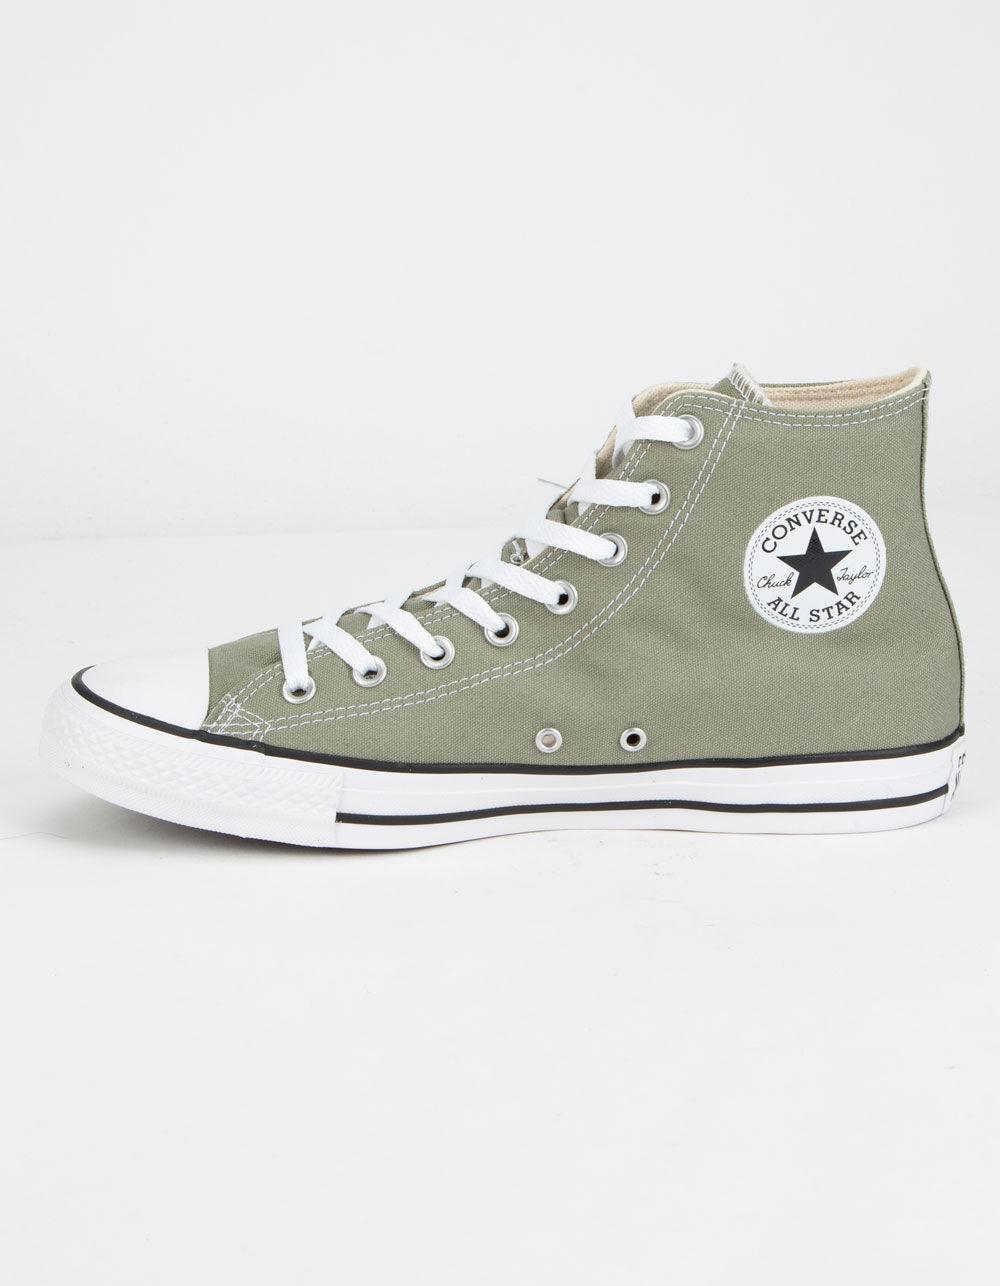 Converse Canvas Chuck Taylor All Star Jade Stone High Top Shoes - Lyst